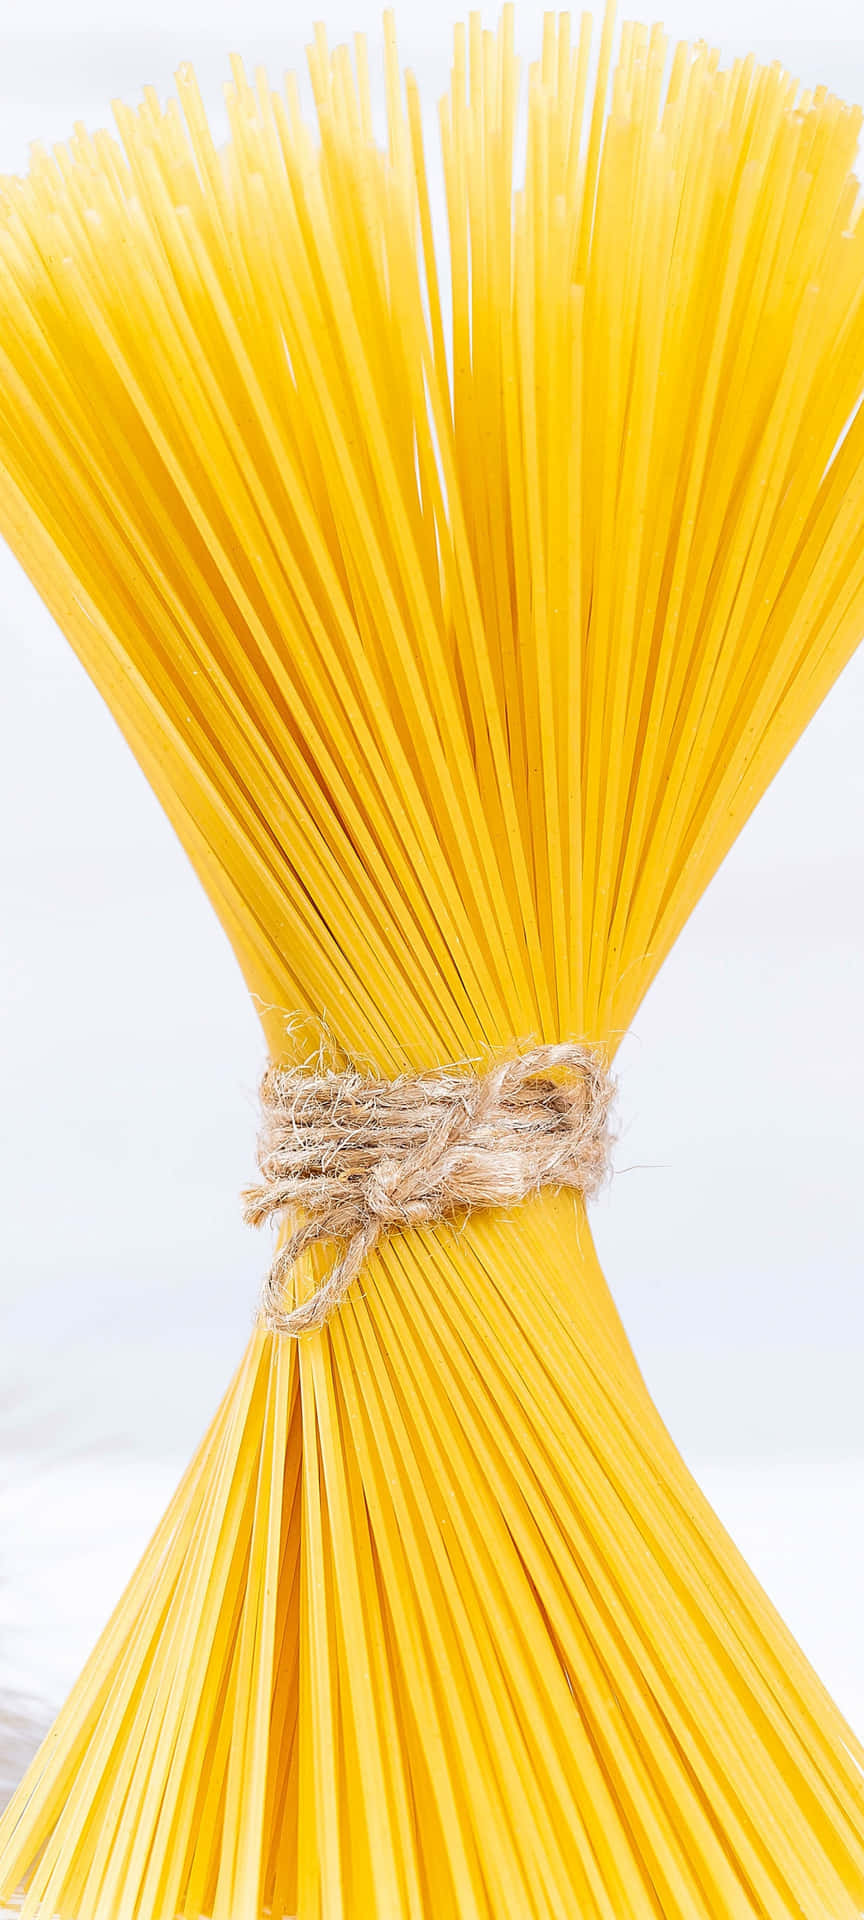 Fresh, Delicious Pasta on Android Background